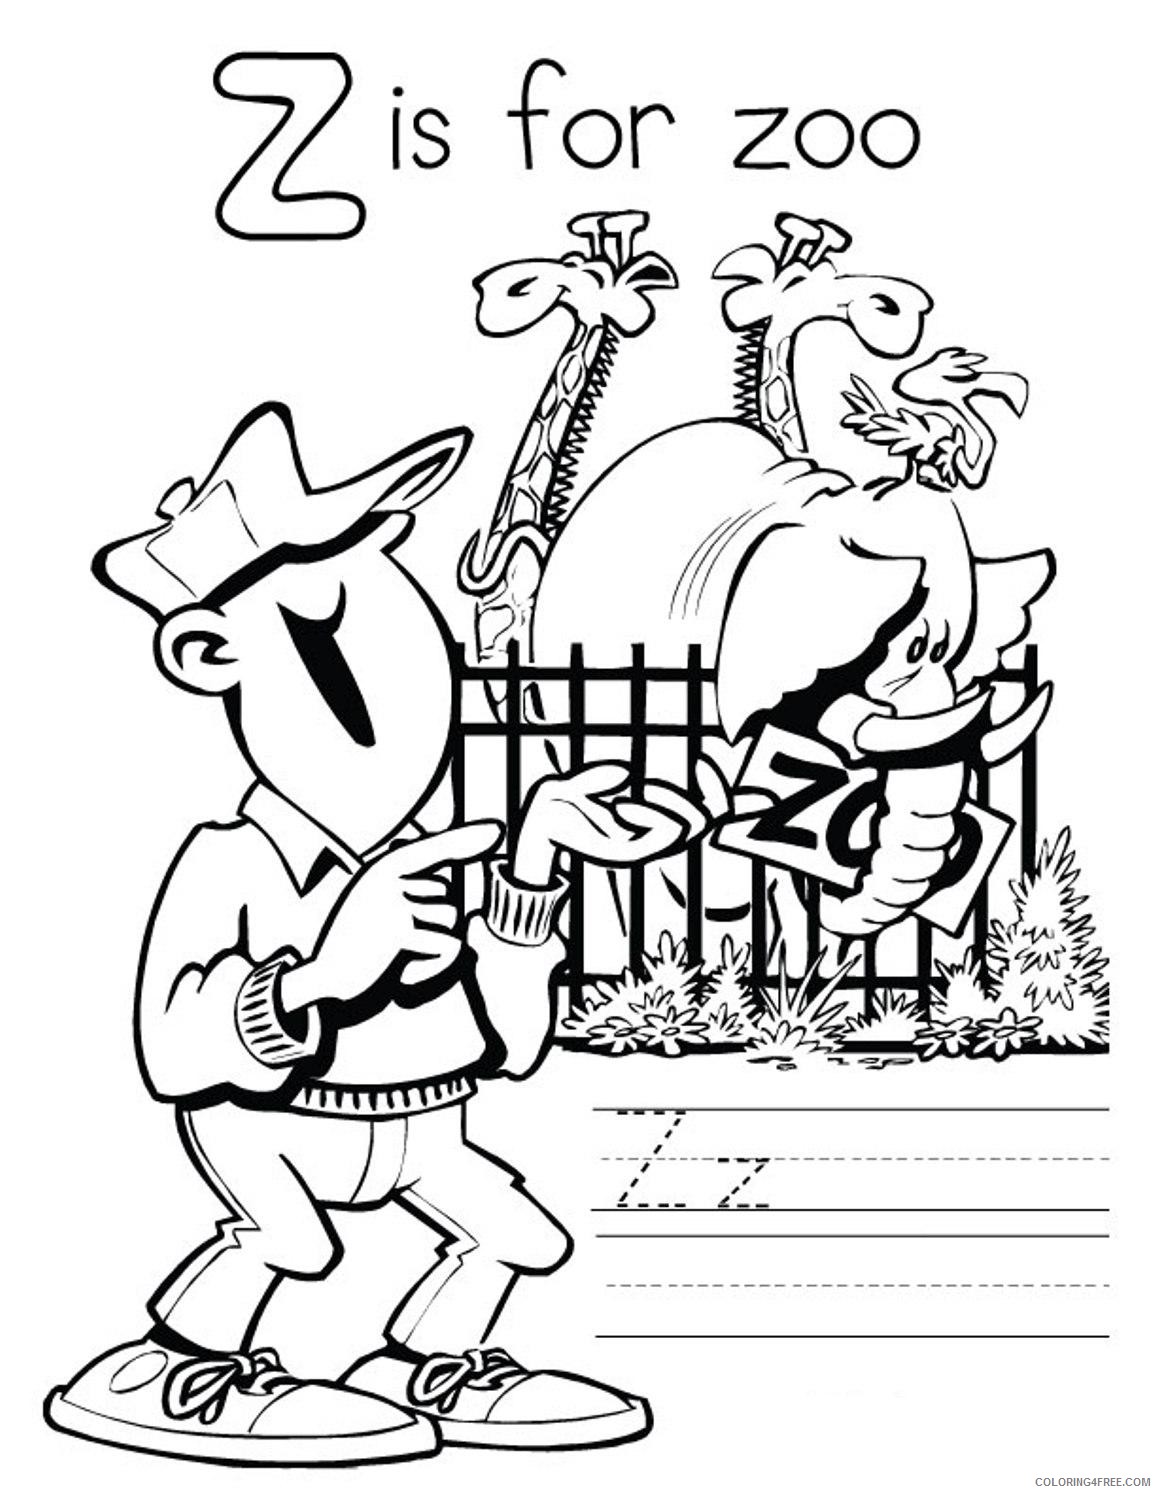 zoo coloring pages z for zoo Coloring4free